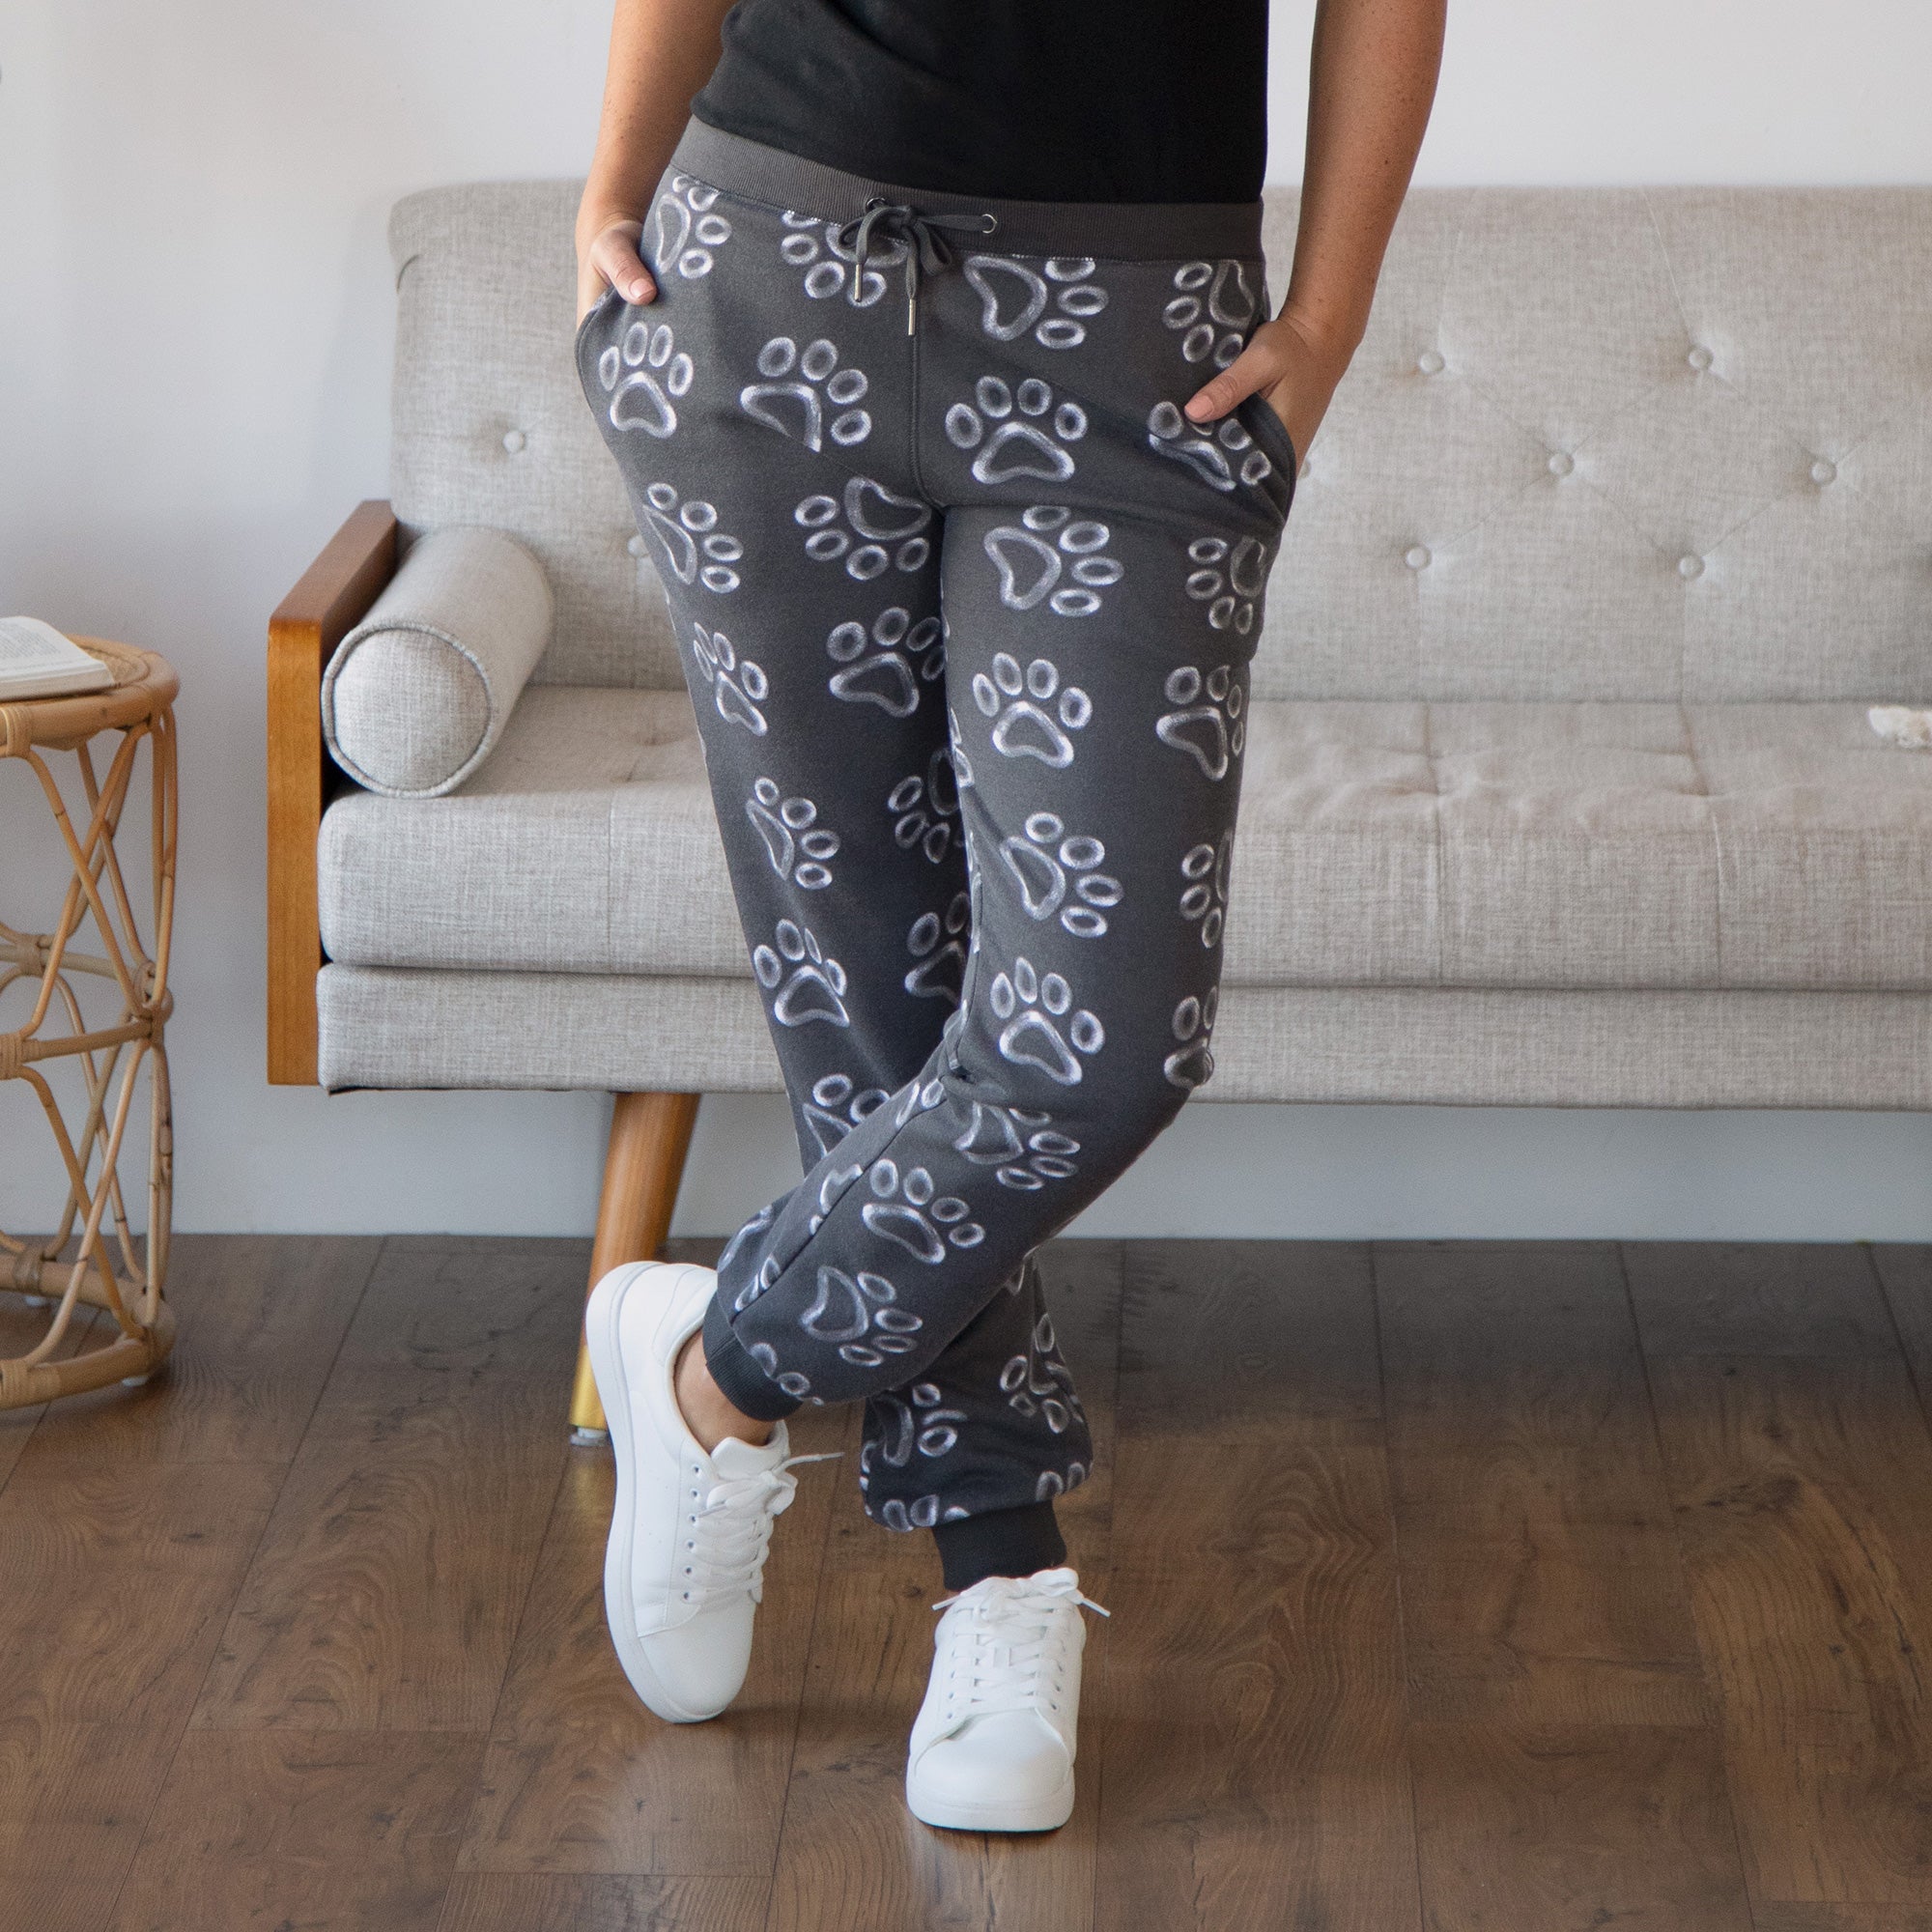 All Over Chalk Paw Sweatpants - 3X